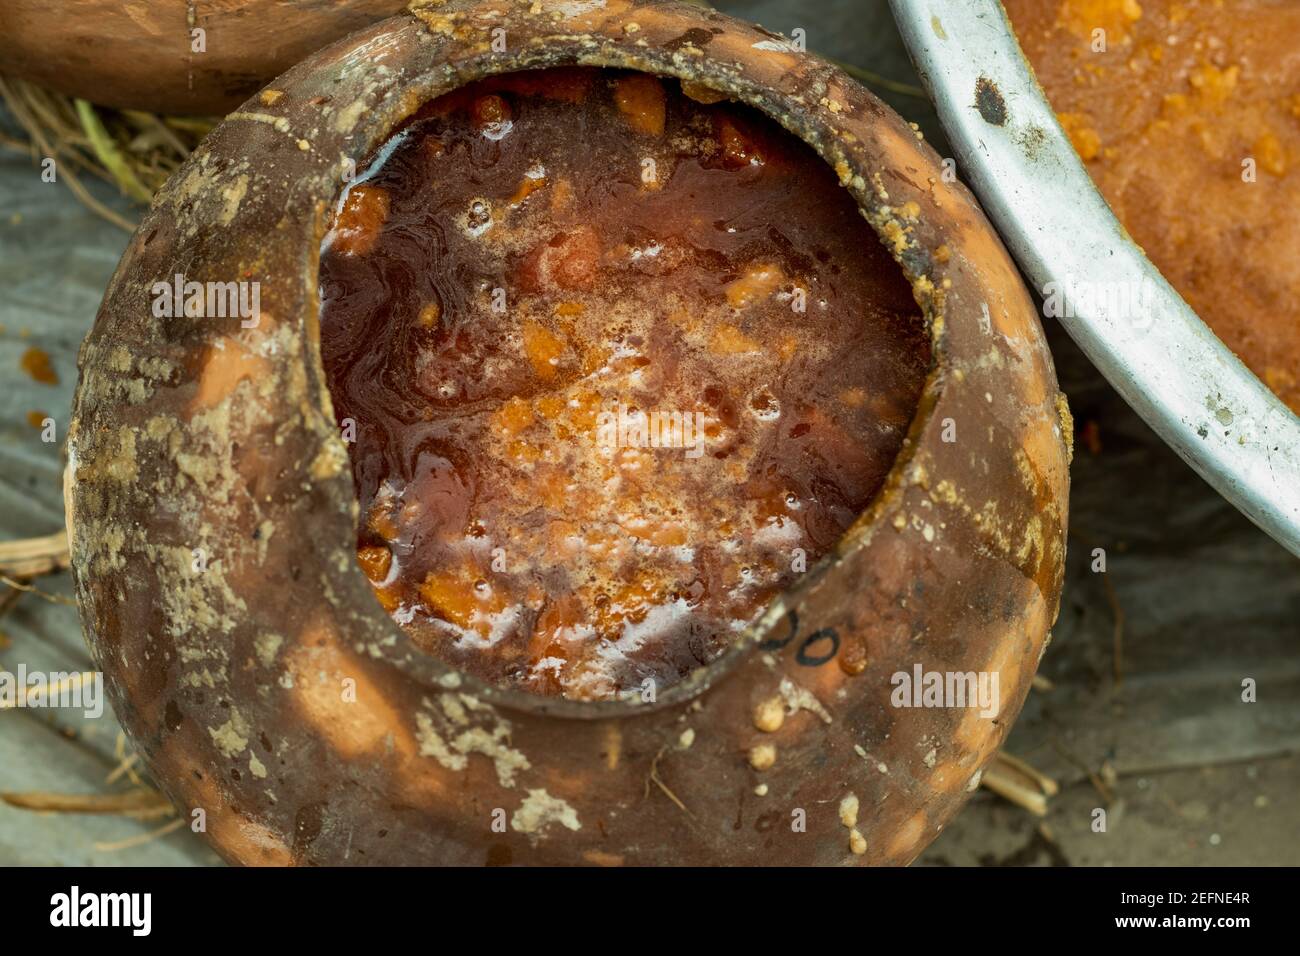 Patali Gur Date Palm Jaggery, also known as Khejur Gur, Nolen Gur, and this is a staple winter sweet ingredient or even consumed as a tiny dessert at Stock Photo